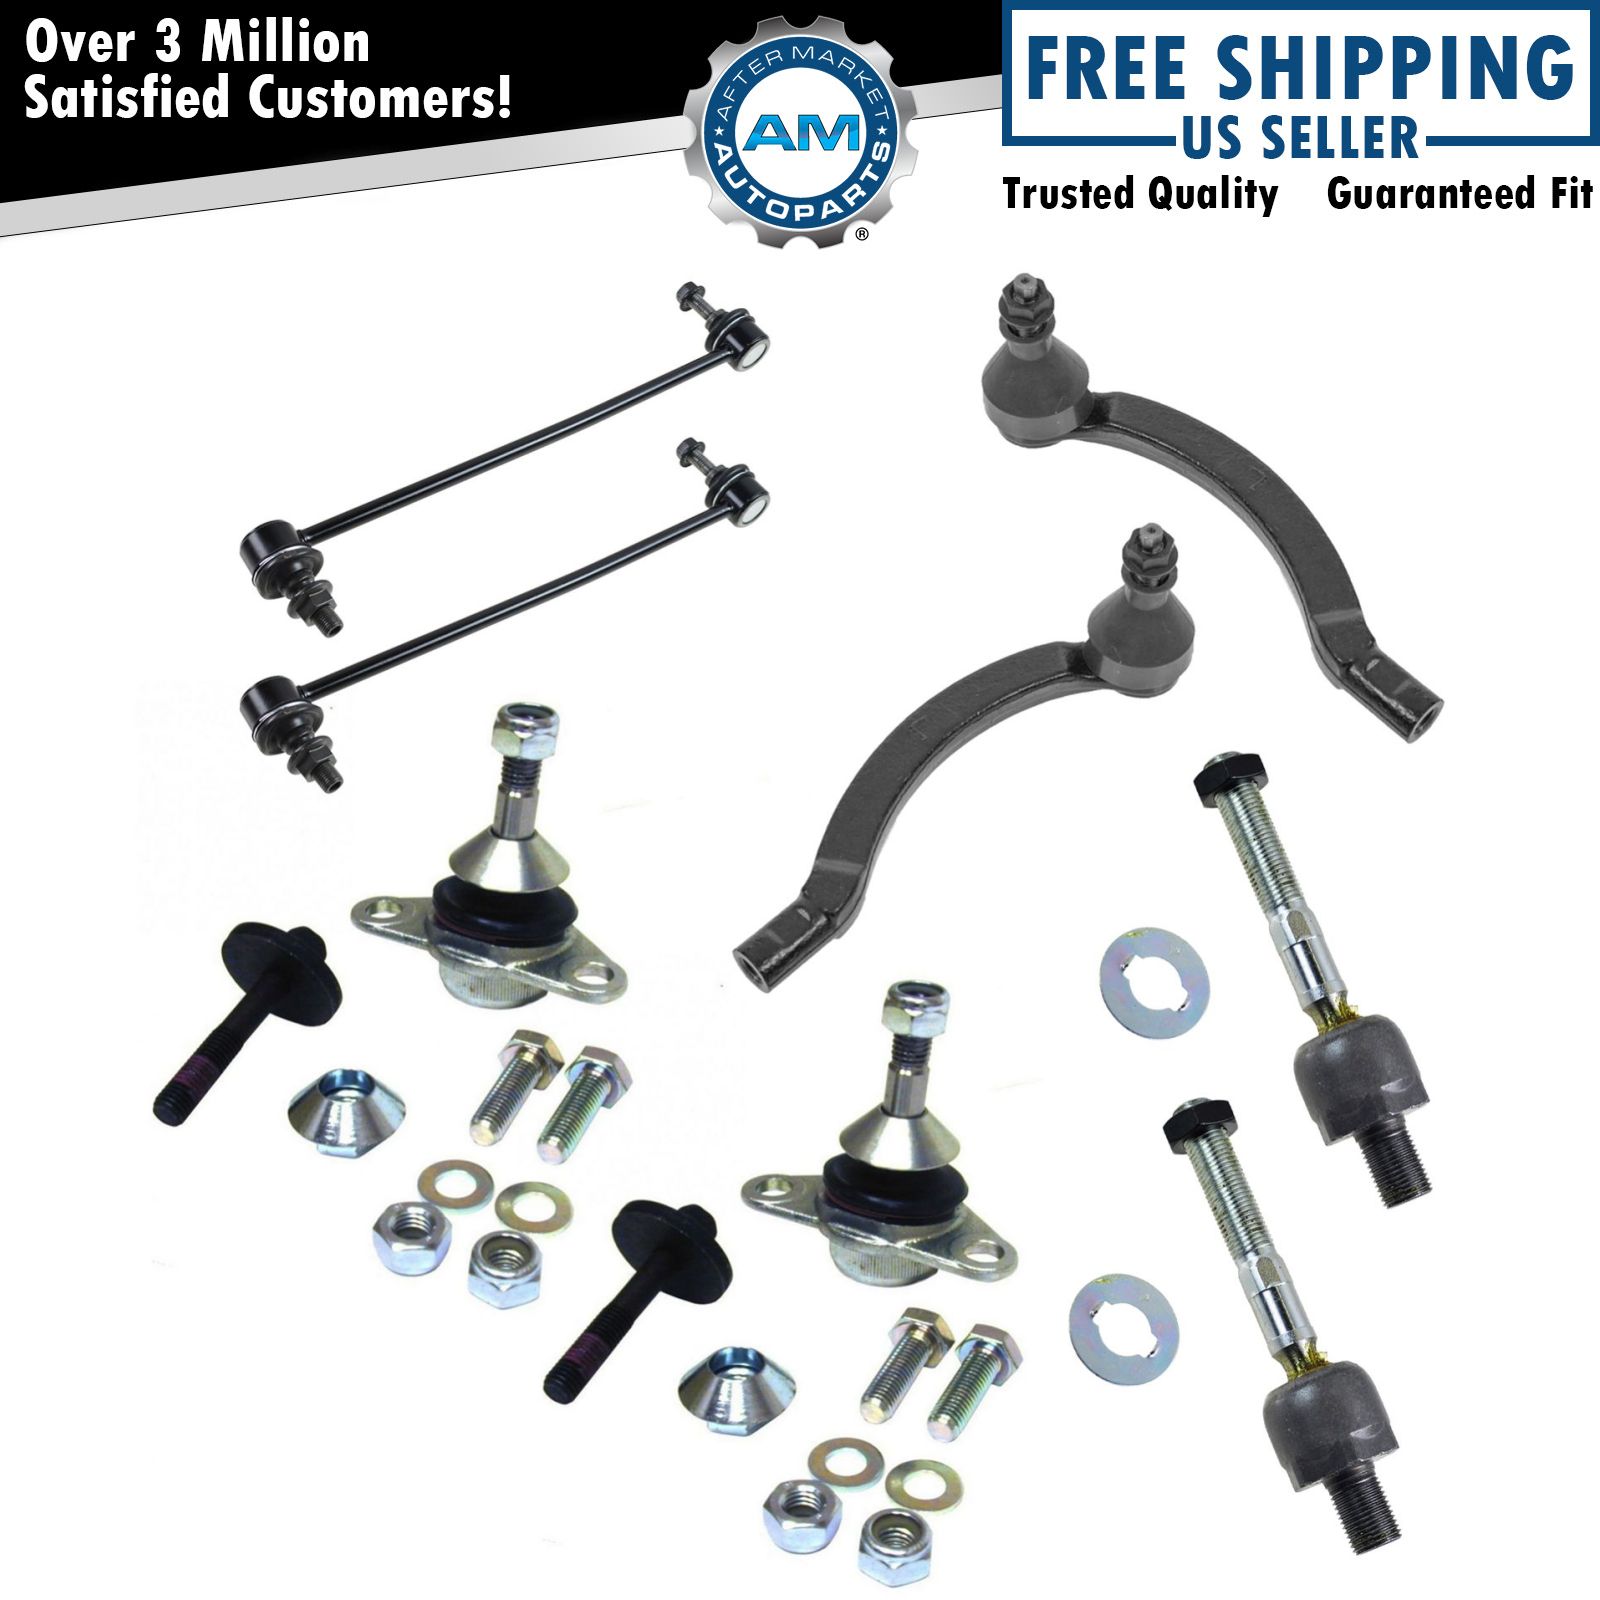 8 Piece Kit Tie Rod Ball Joint Sway Bar End Link LH RH for Volvo S60 S80 V70 New